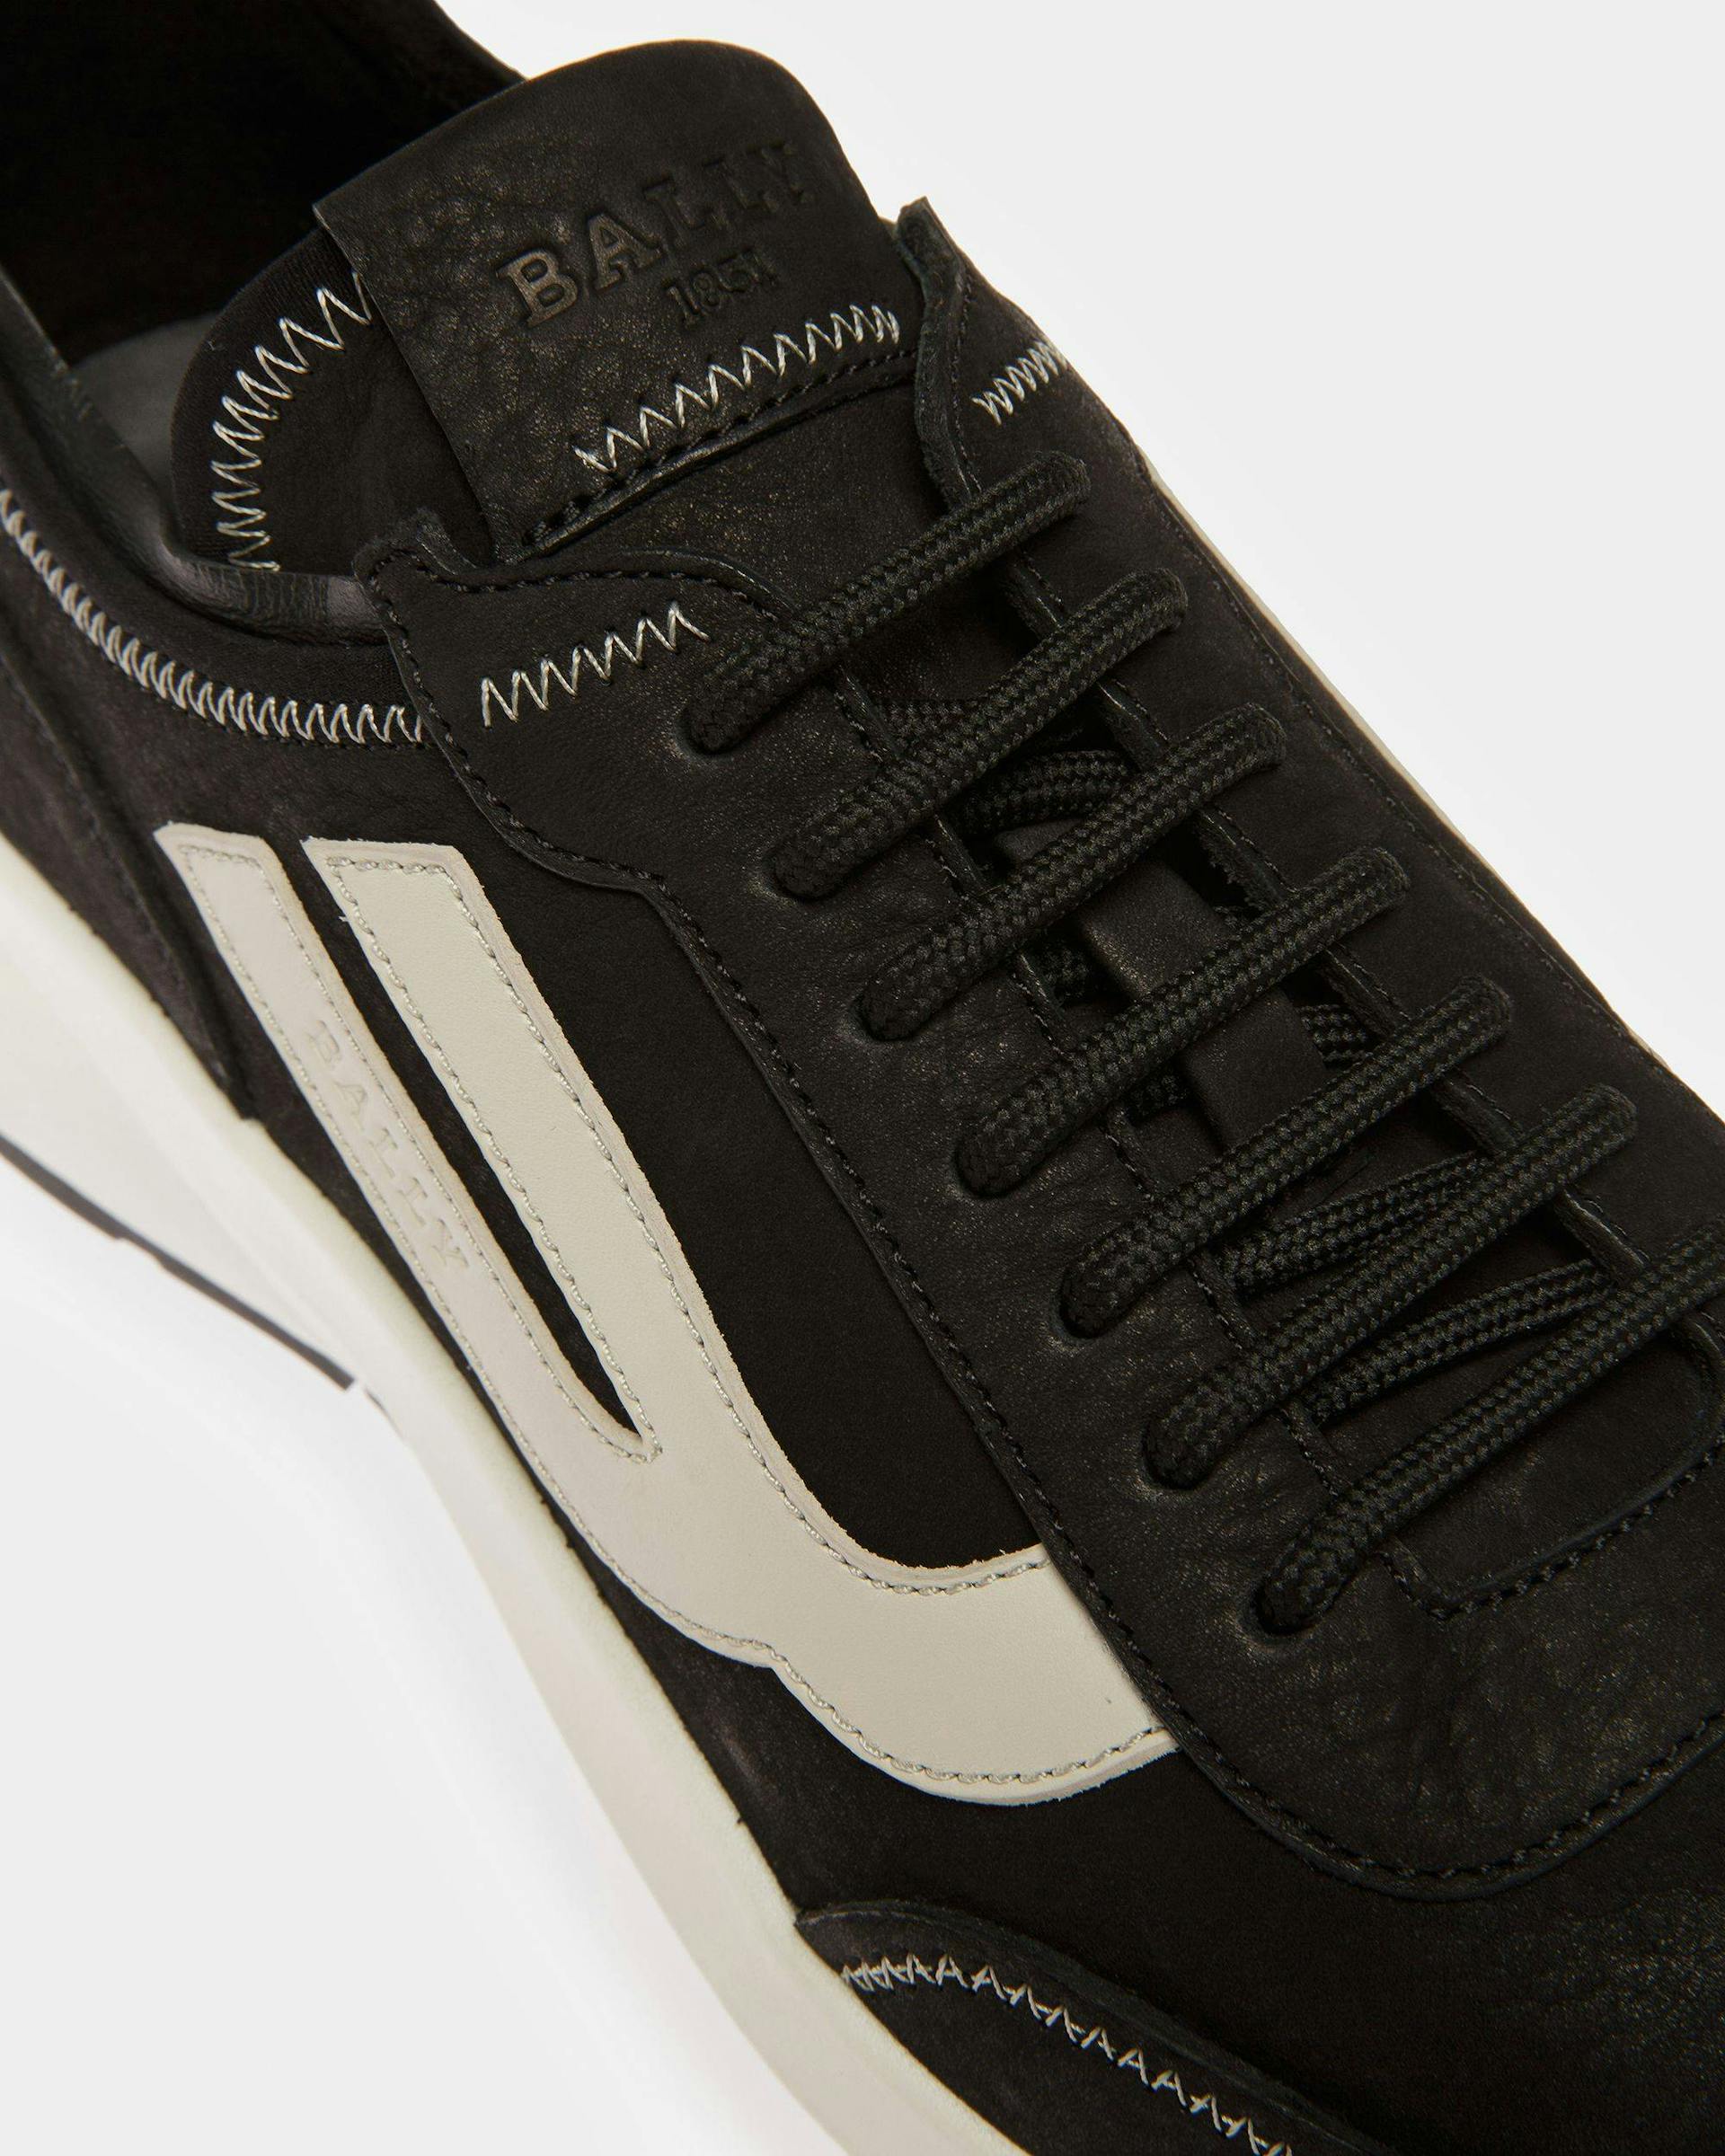 Darys Leather Sneakers In Black And Dusty White - Men's - Bally - 05